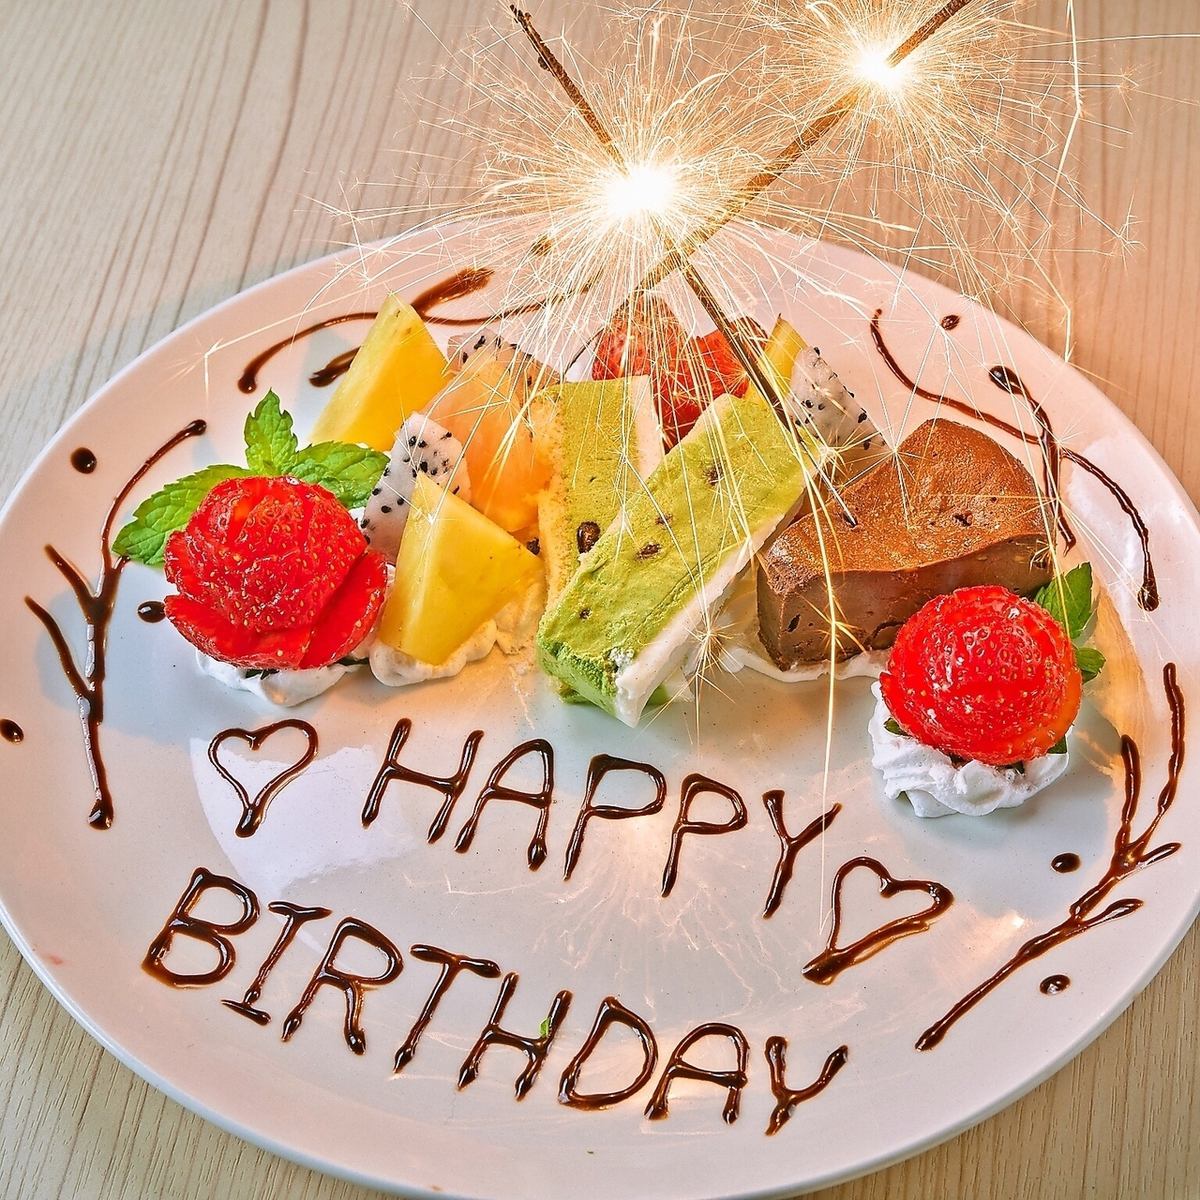 [Umeda 1 minute] Celebration♪ Free message plate available★